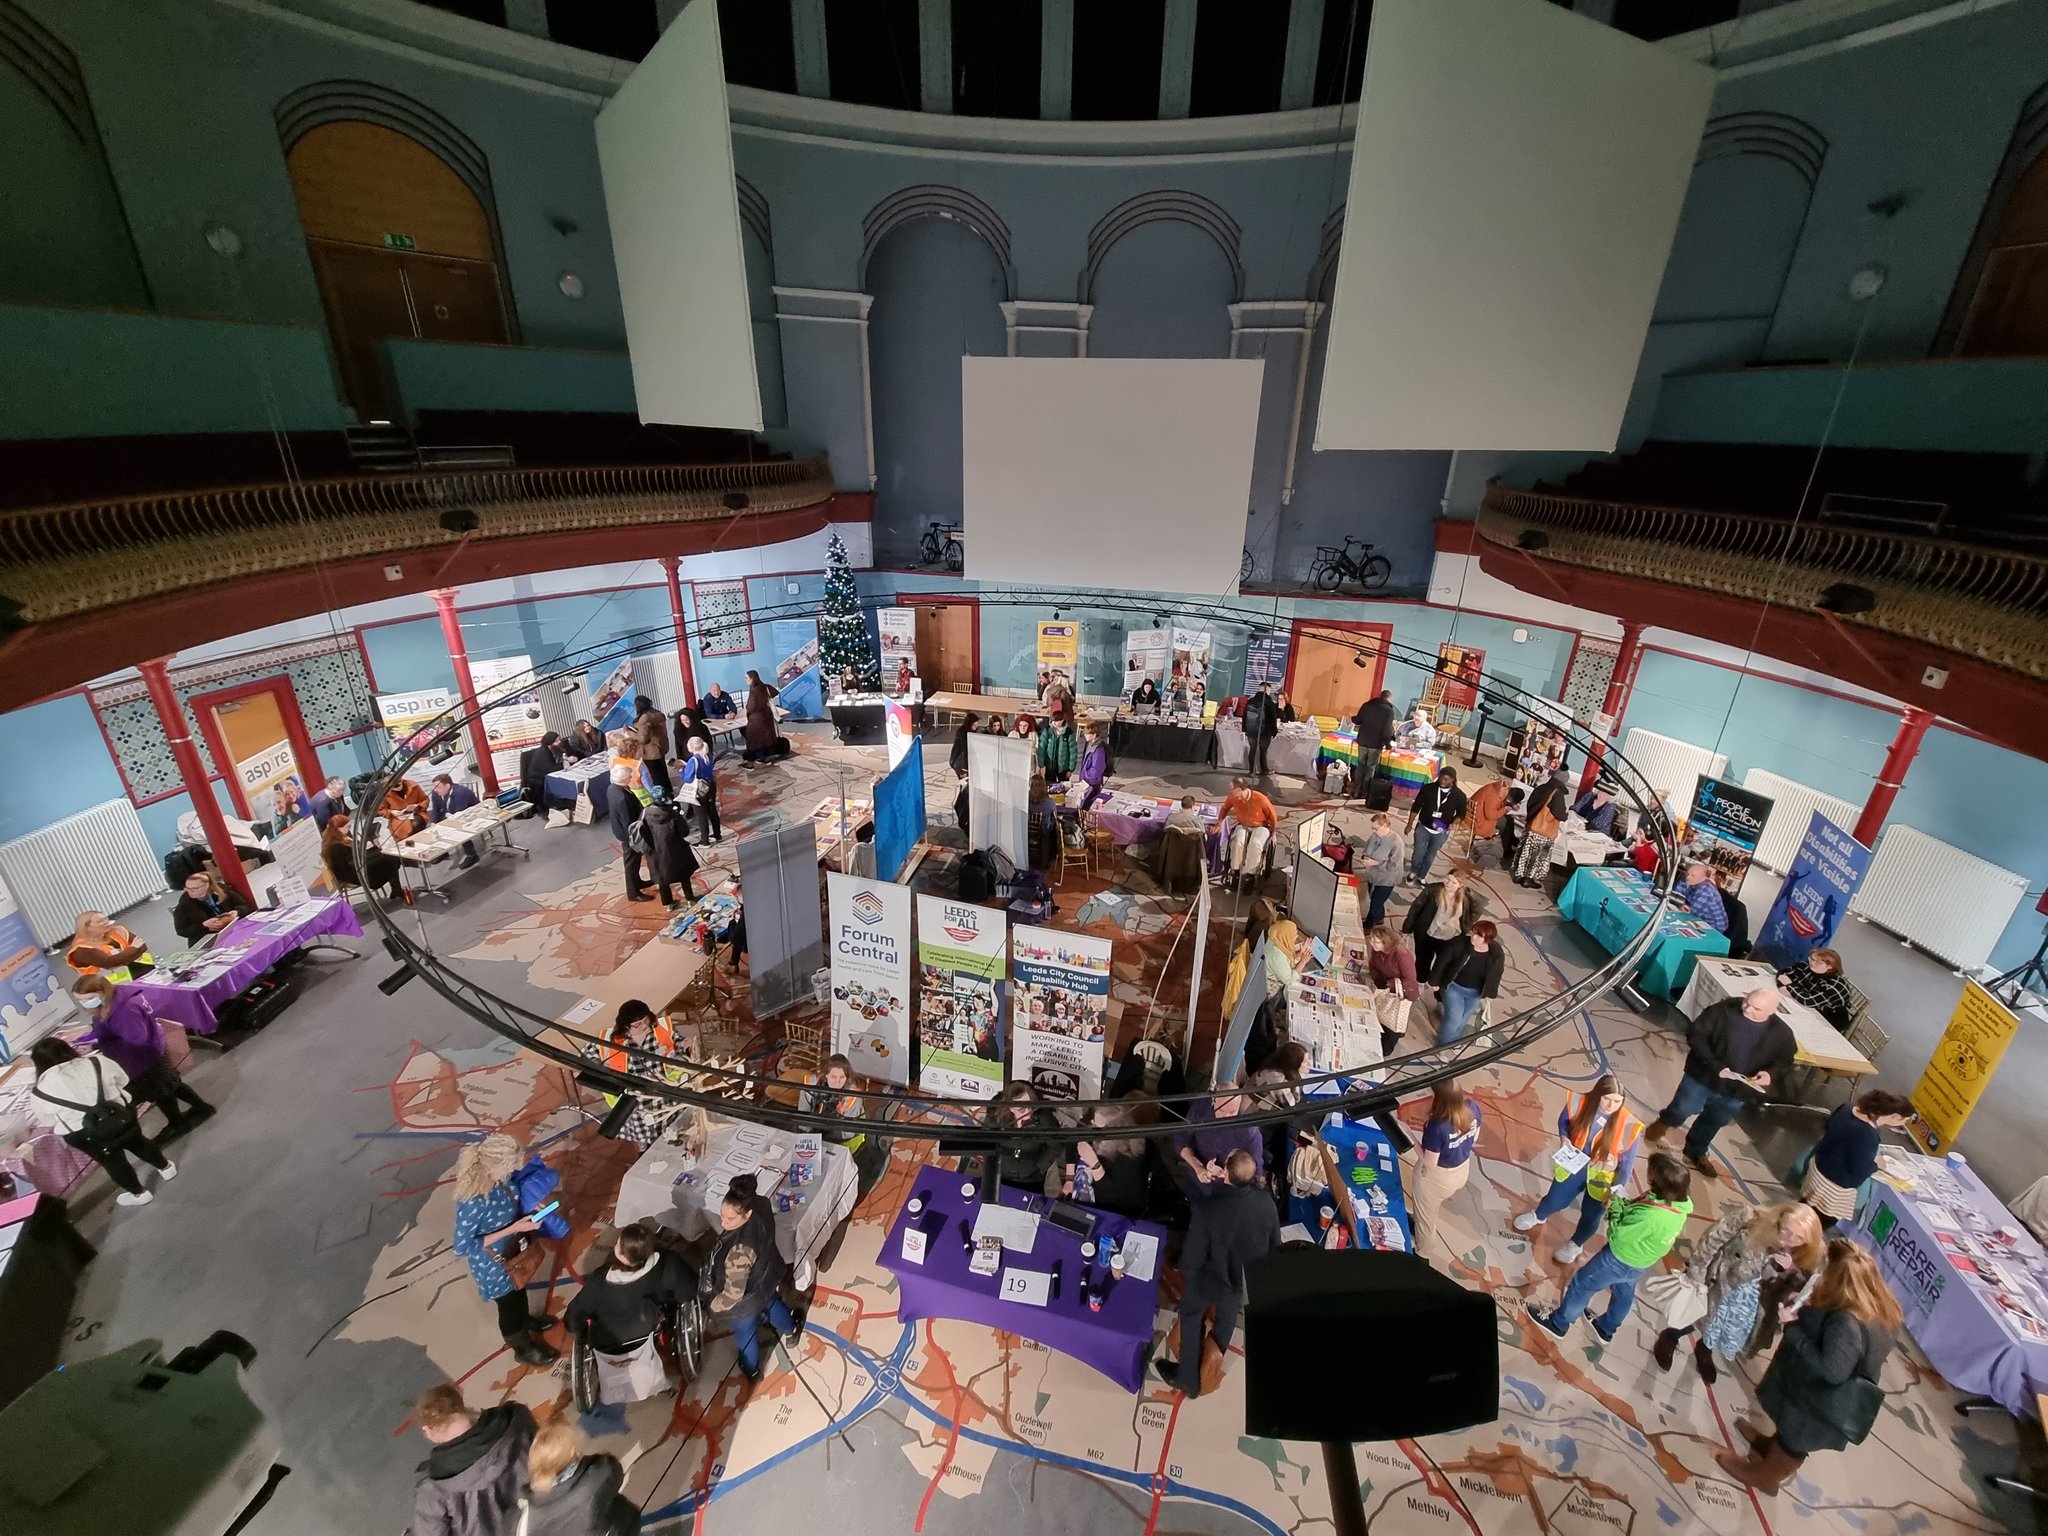 Photo of the Broderick Hall from the second floor balcony in Leeds City Museum showing the Leeds for all marketplace event from above with lots of people and stalls